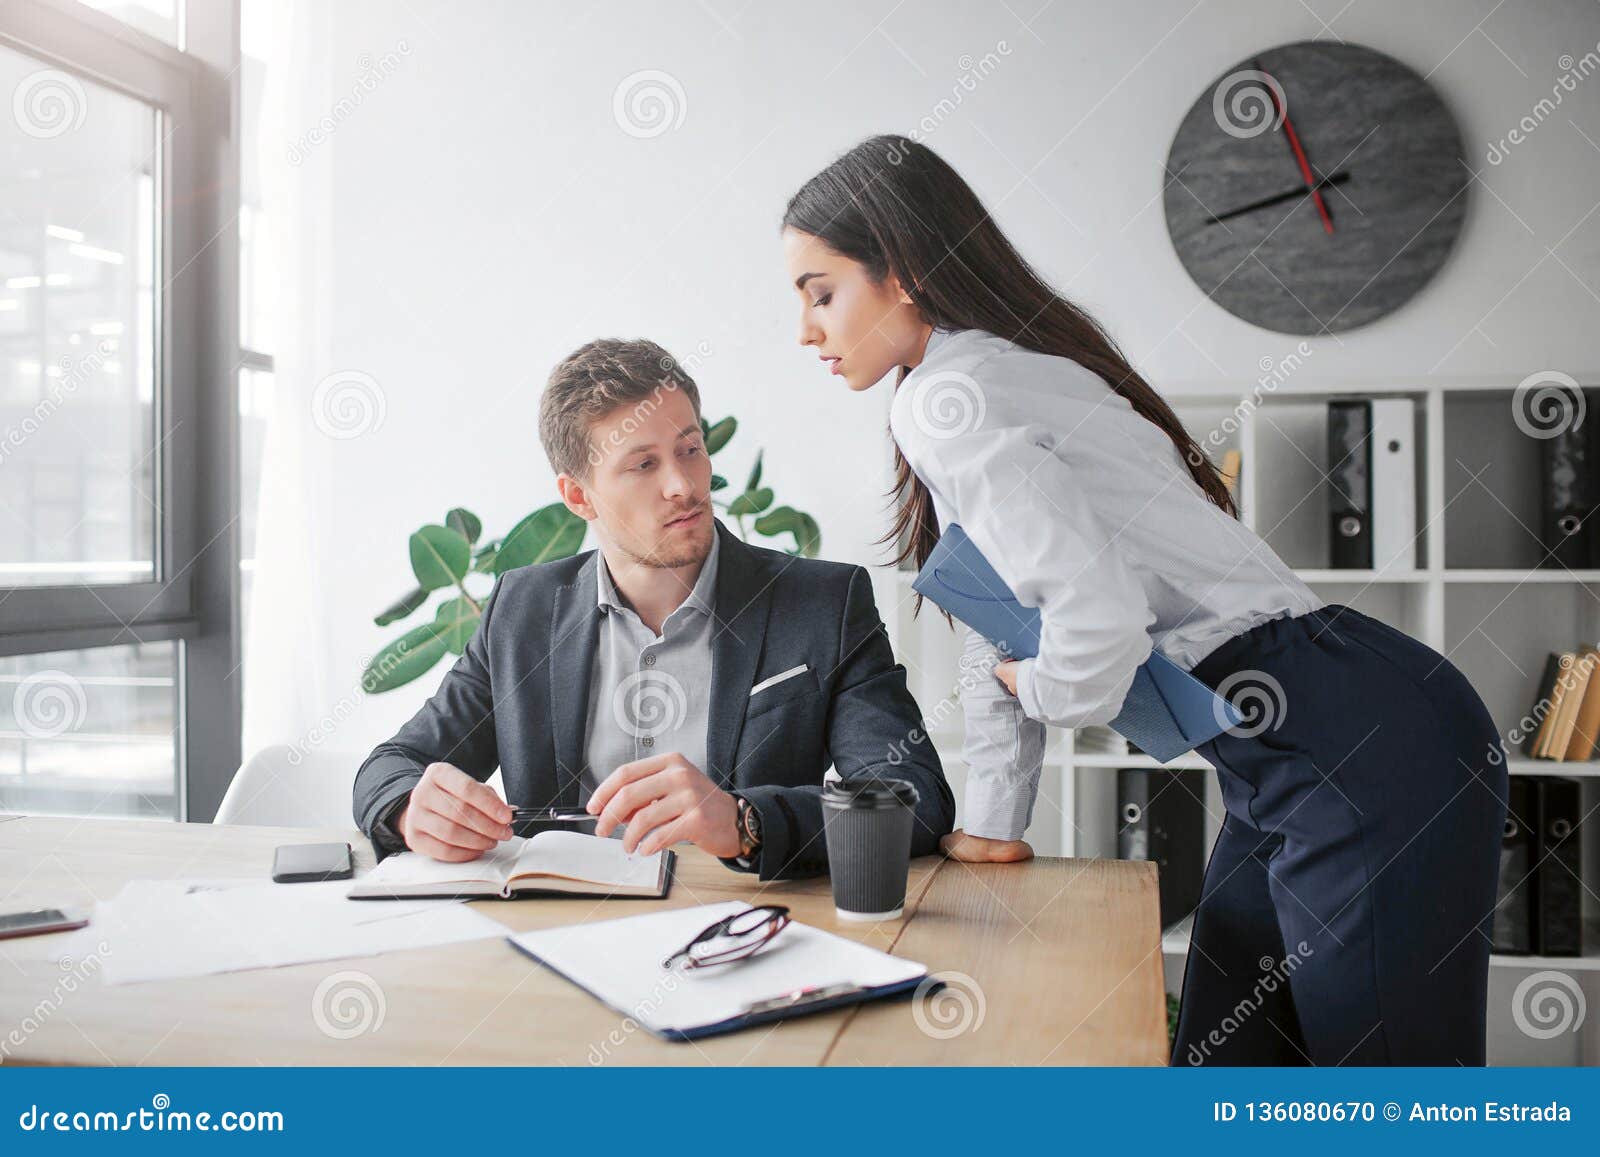 https://thumbs.dreamstime.com/z/sexual-young-women-lean-to-table-looks-her-boss-young-men-sit-table-look-her-breast-guy-excited-sexual-young-136080670.jpg